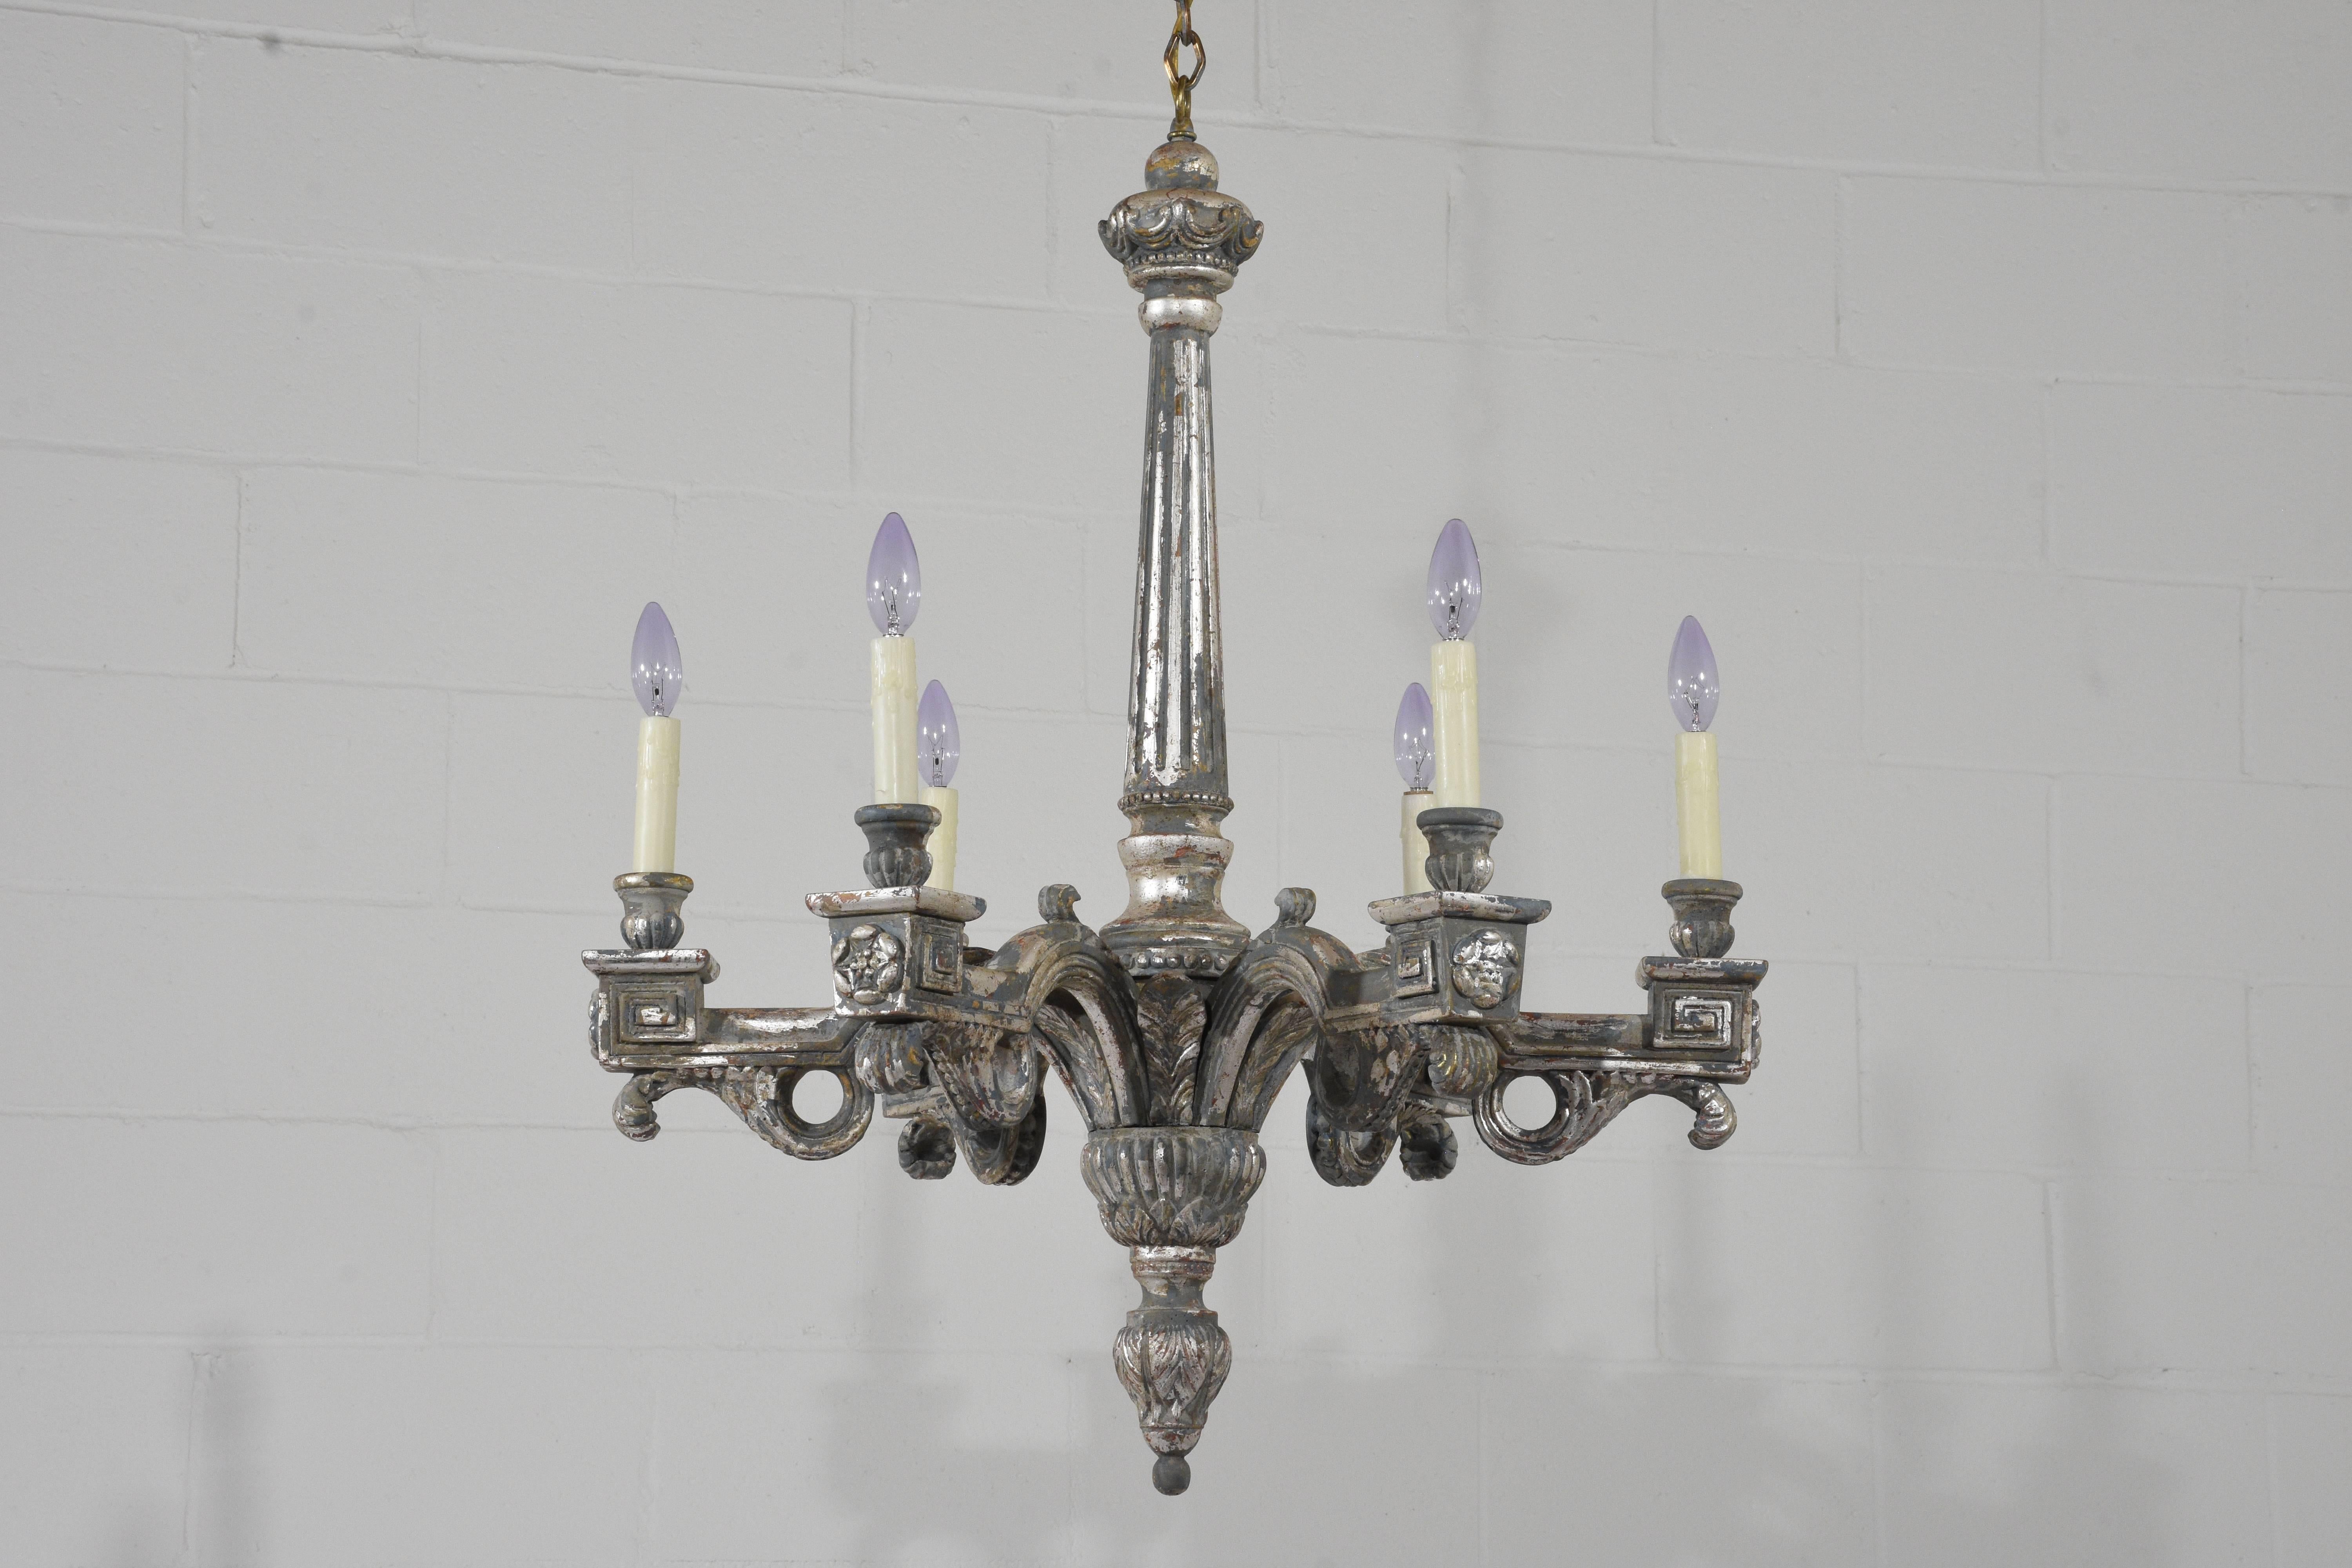 This pair of 1950s Italian Neoclassical-style chandeliers are made of wood that has been painted in a gray, red and off-white color combination with silver leaf accents and a beautiful distressed finish. The six arms are adorned with carved details